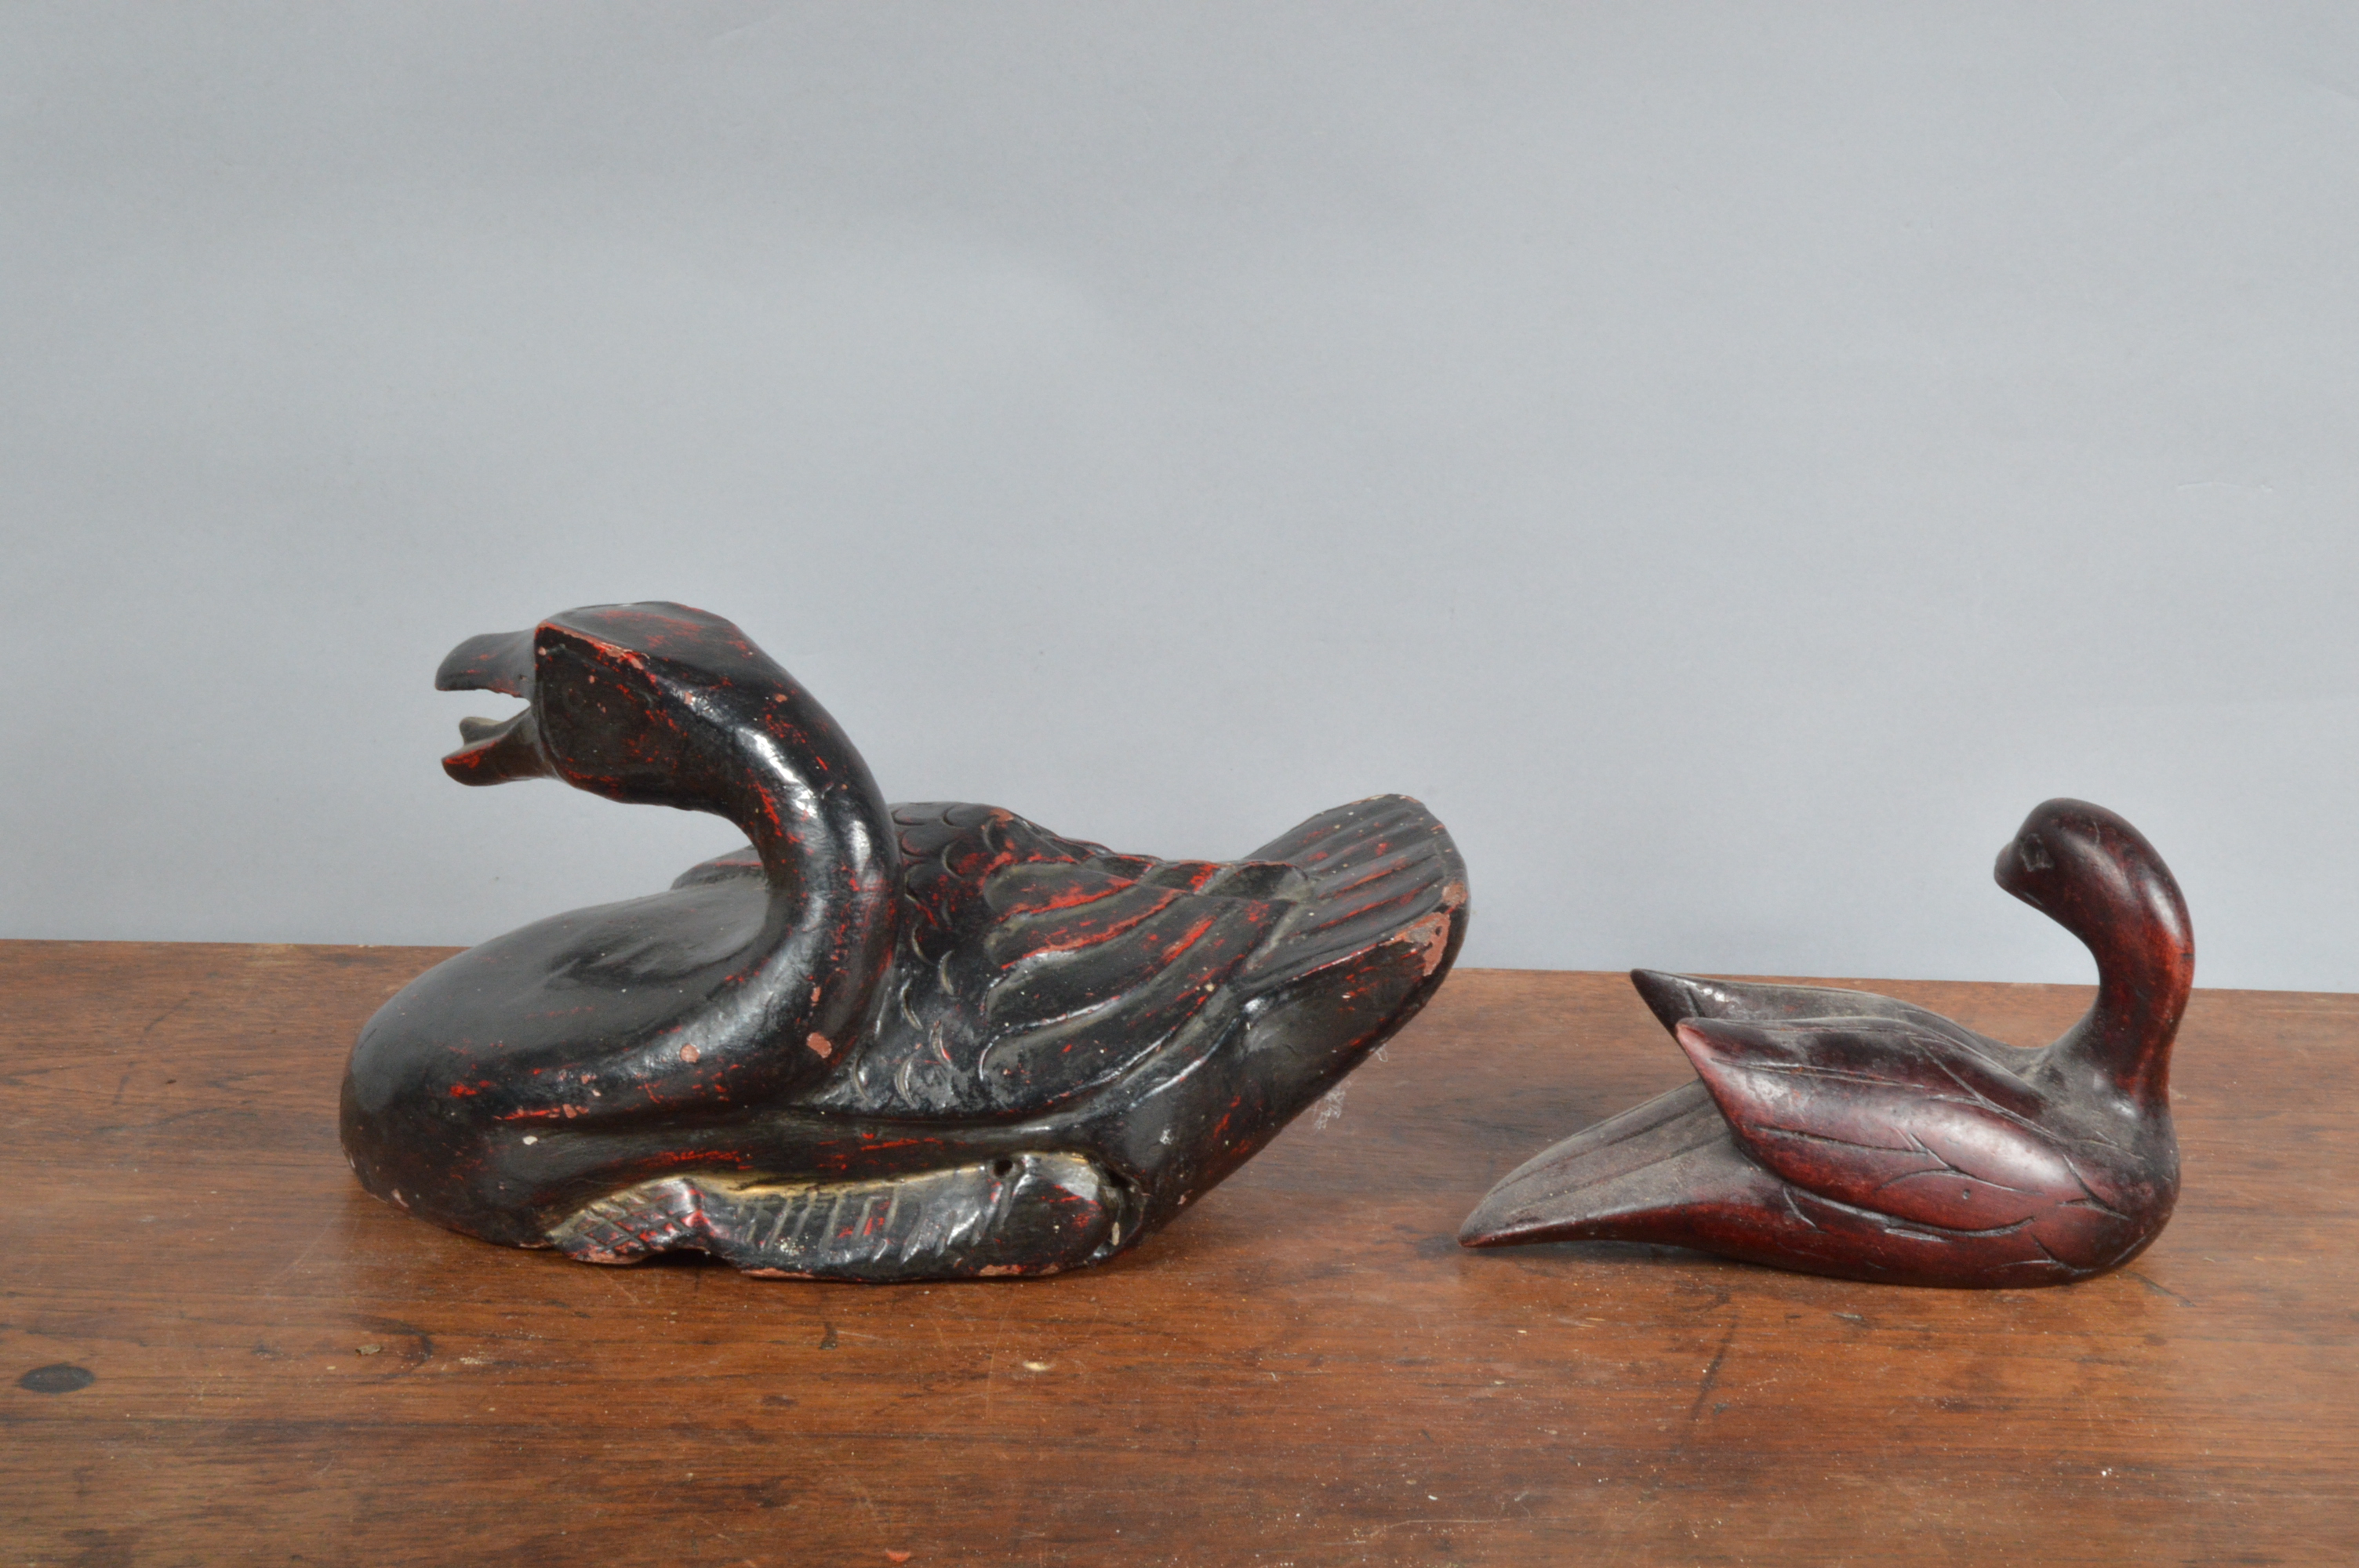 Two far eastern style decoy ducks, the largest example ebonised wood with a worn red painted finish, - Image 2 of 2